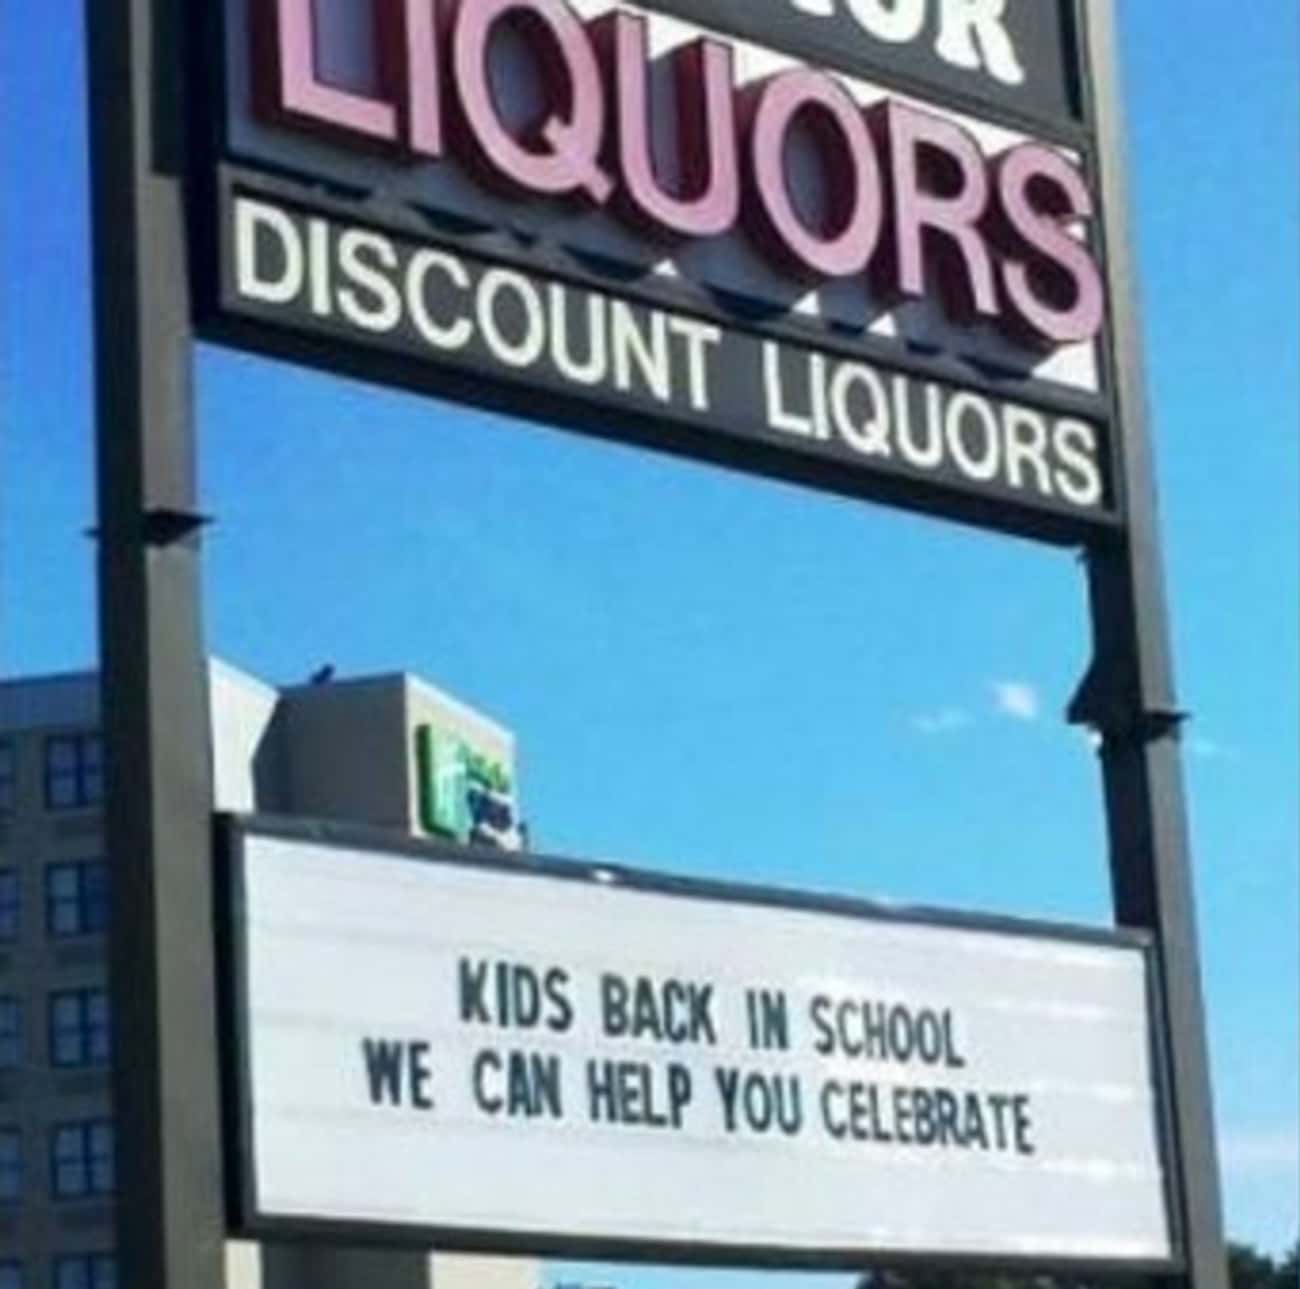 This Liquor Store Is Even Getting into the Back to School Spirit